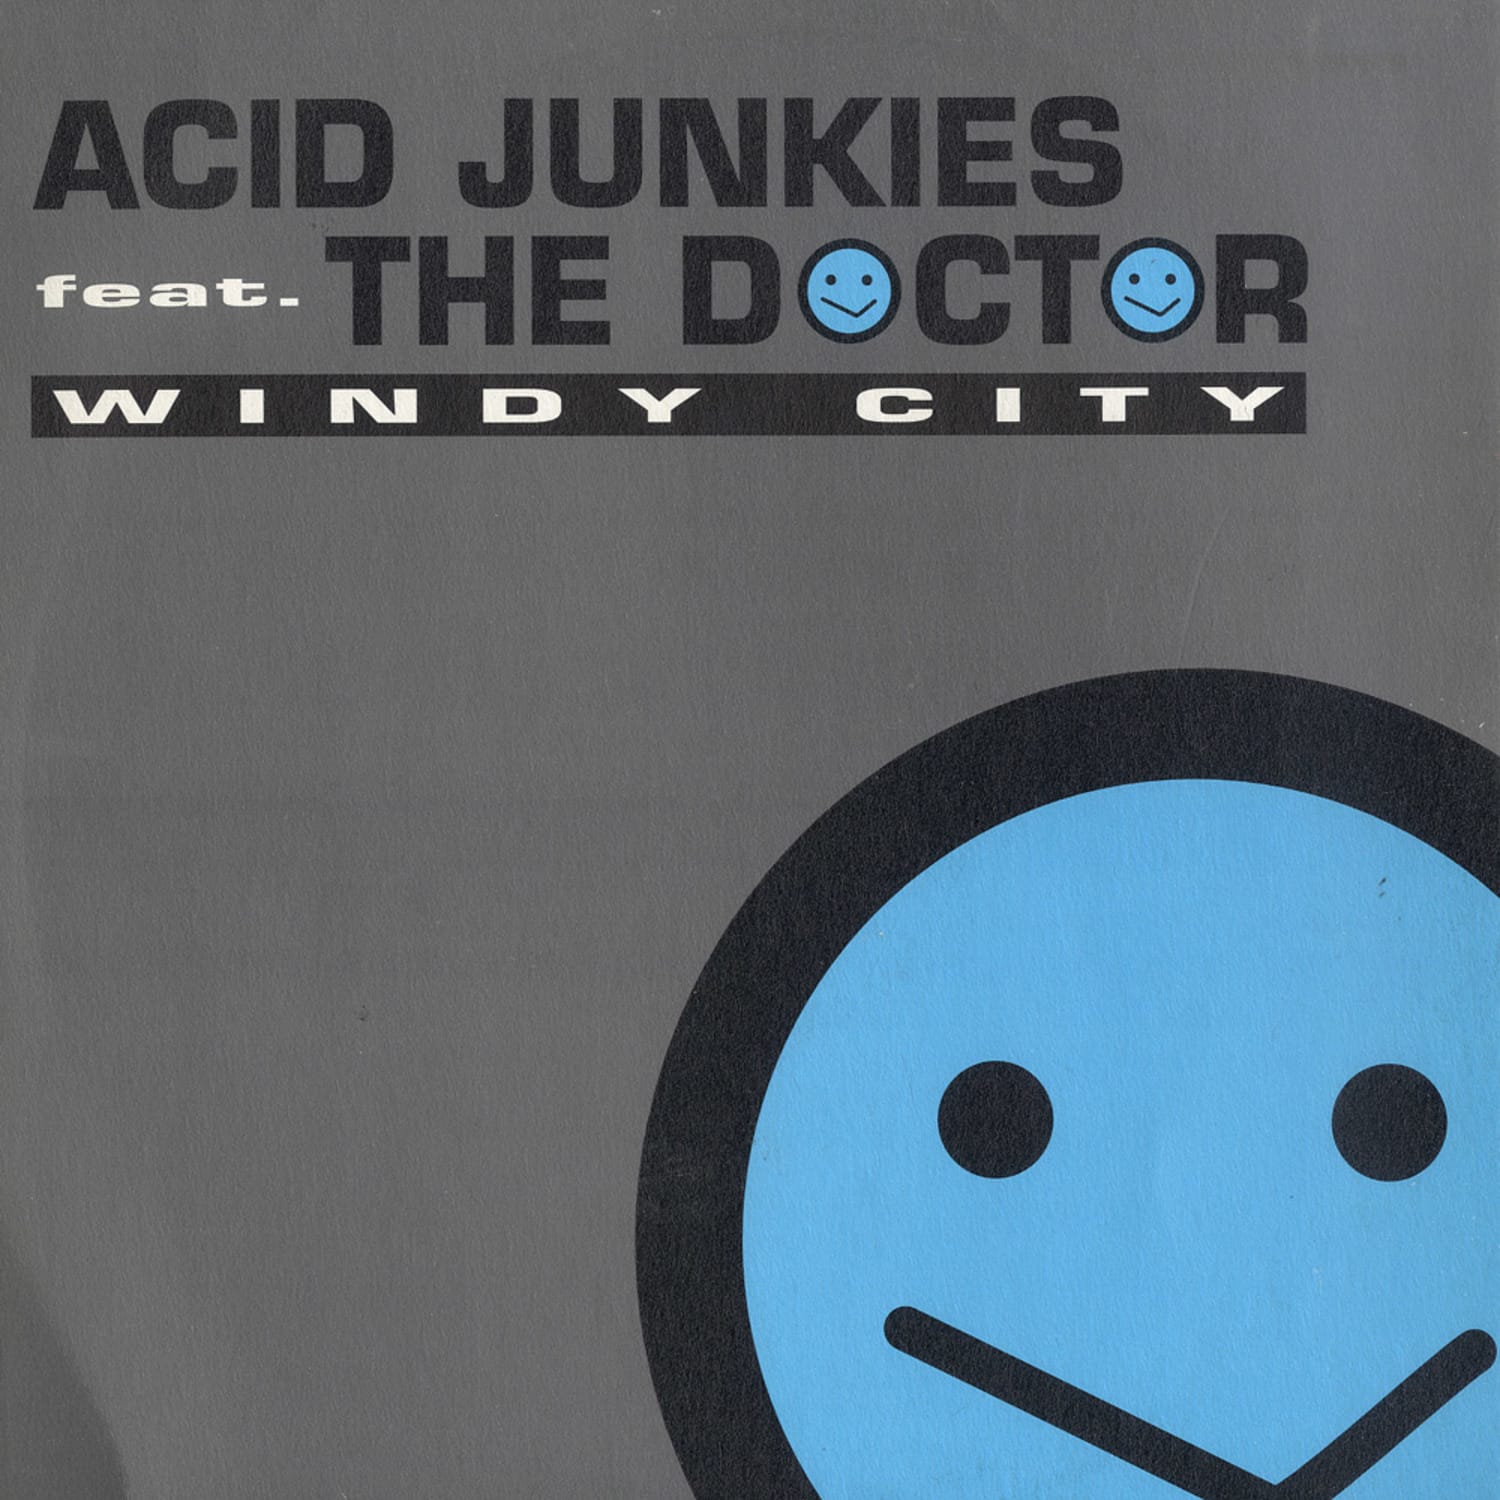 Acid Junkies feat The Doctor - WINDY CITY